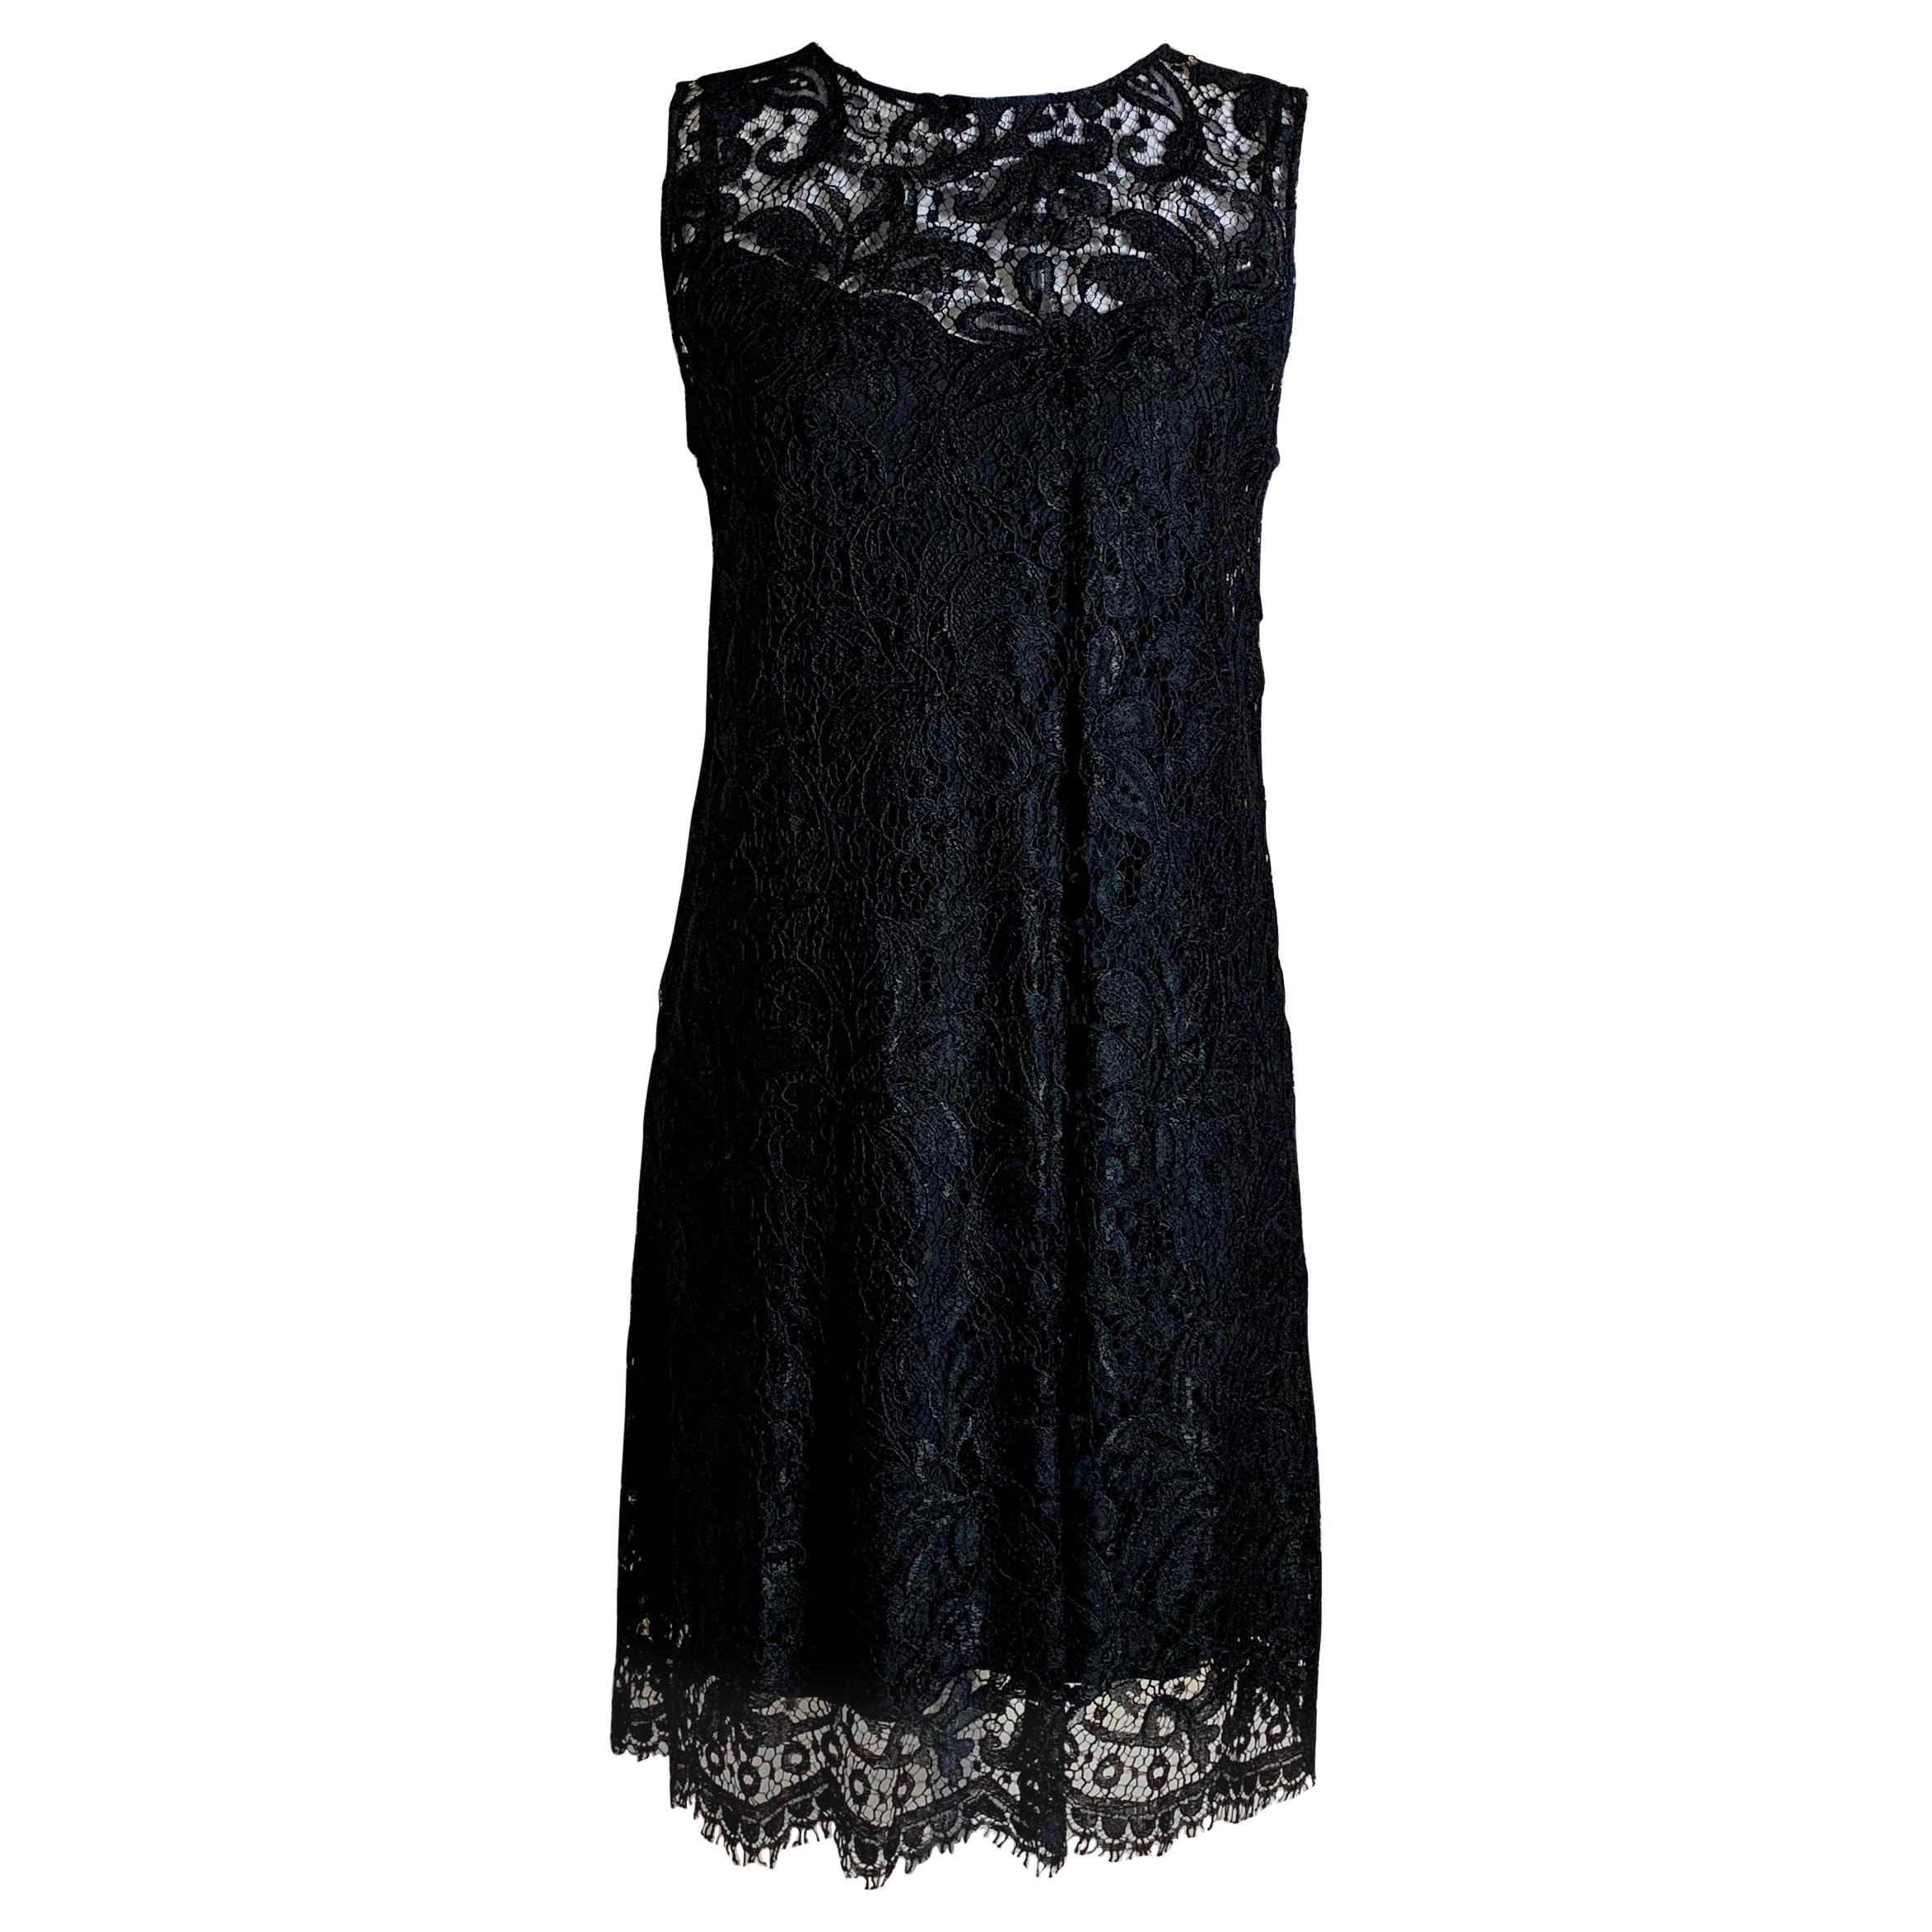 Dolce & Gabbana Black Cotton Lace, Silk Lined Sleeveless Dress with Tags, Italy For Sale